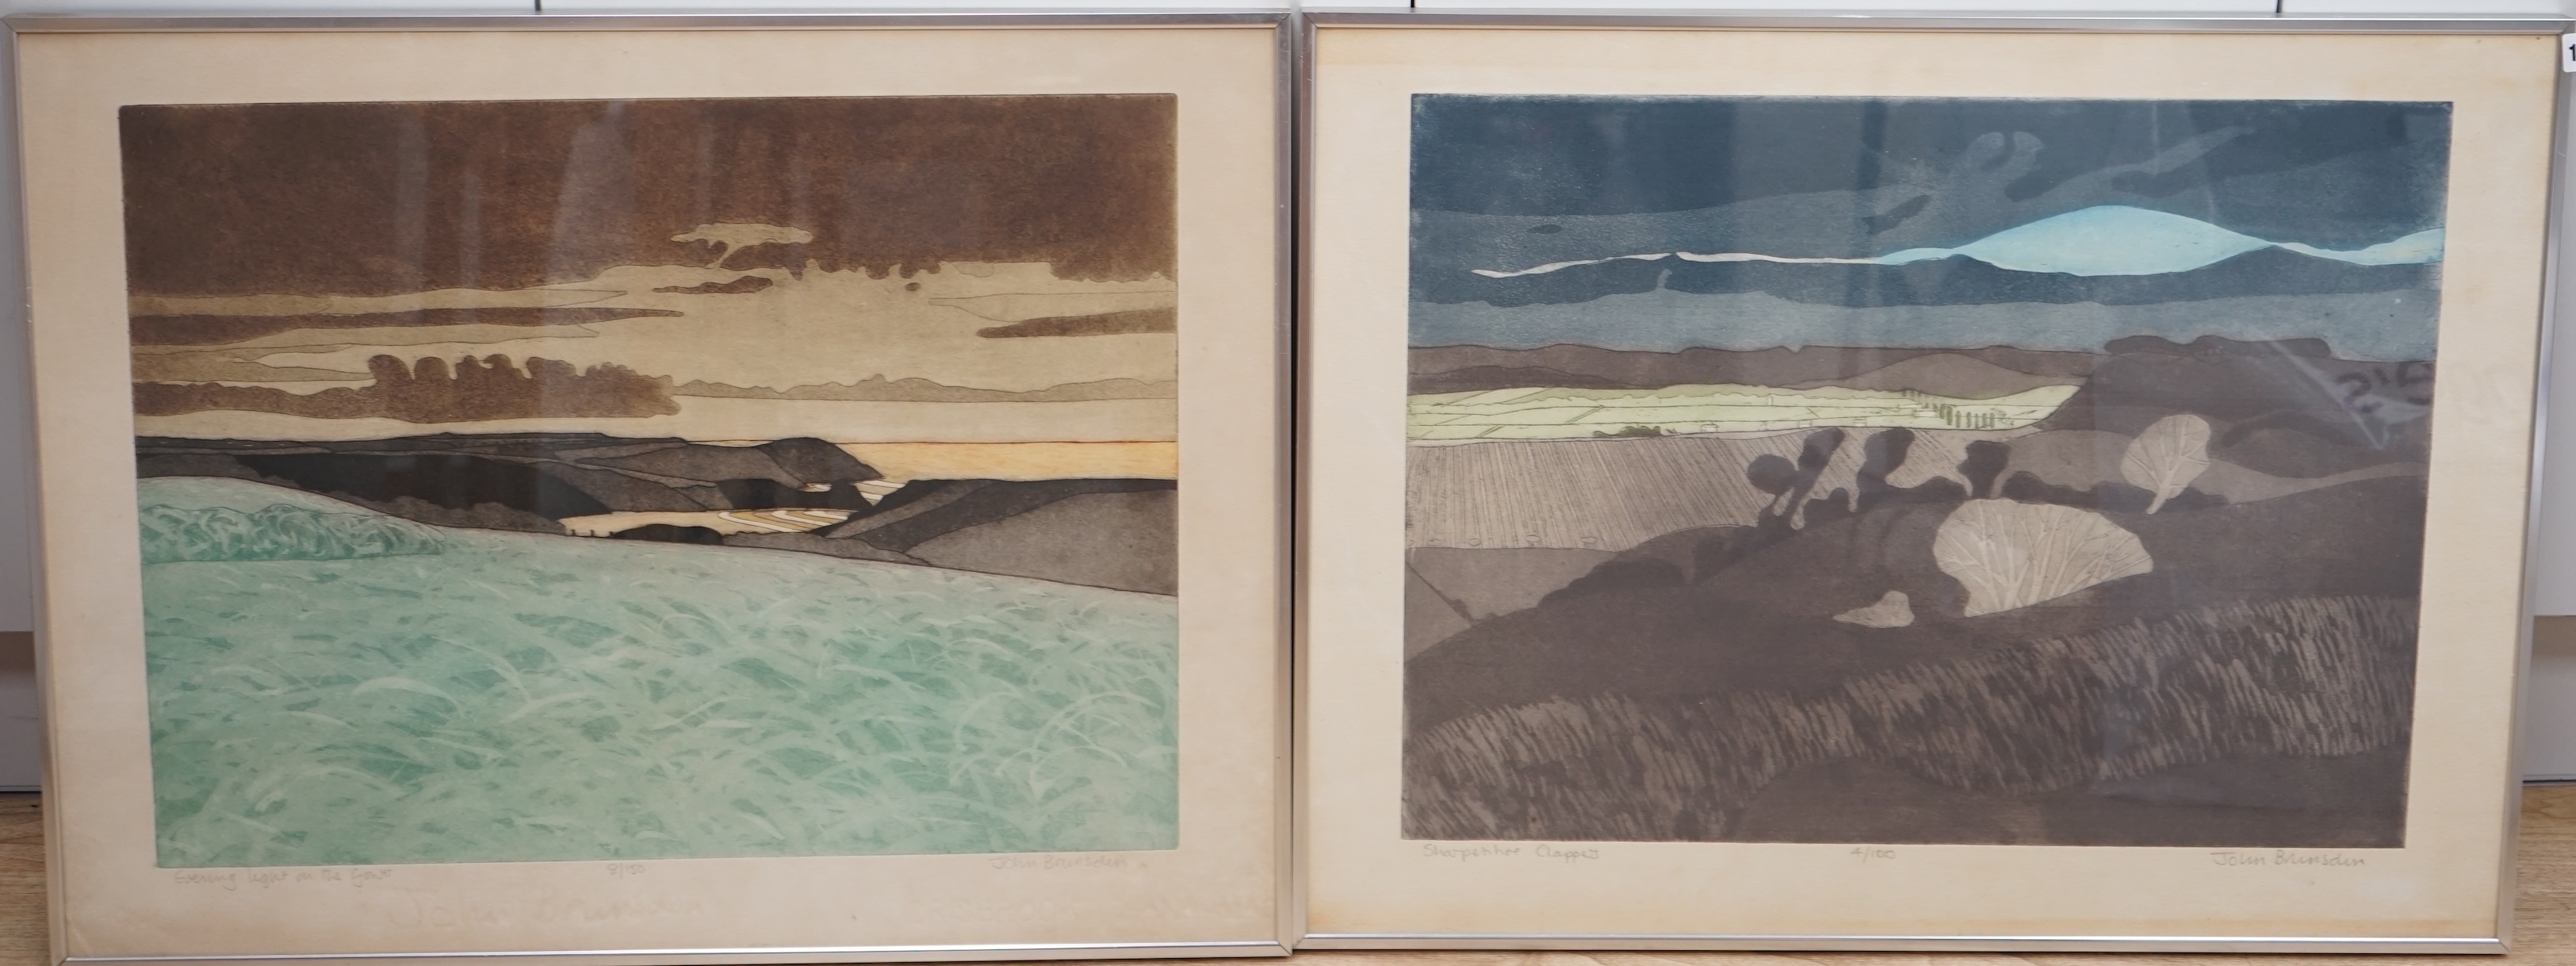 John Brunsdon (1933-2014), pair of etchings with aquatint, 'Evening light on the Gower' and one other, each limited edition, signed in pencil, 54 x 71cm. Condition - poor to fair, browning and discolouration to paper